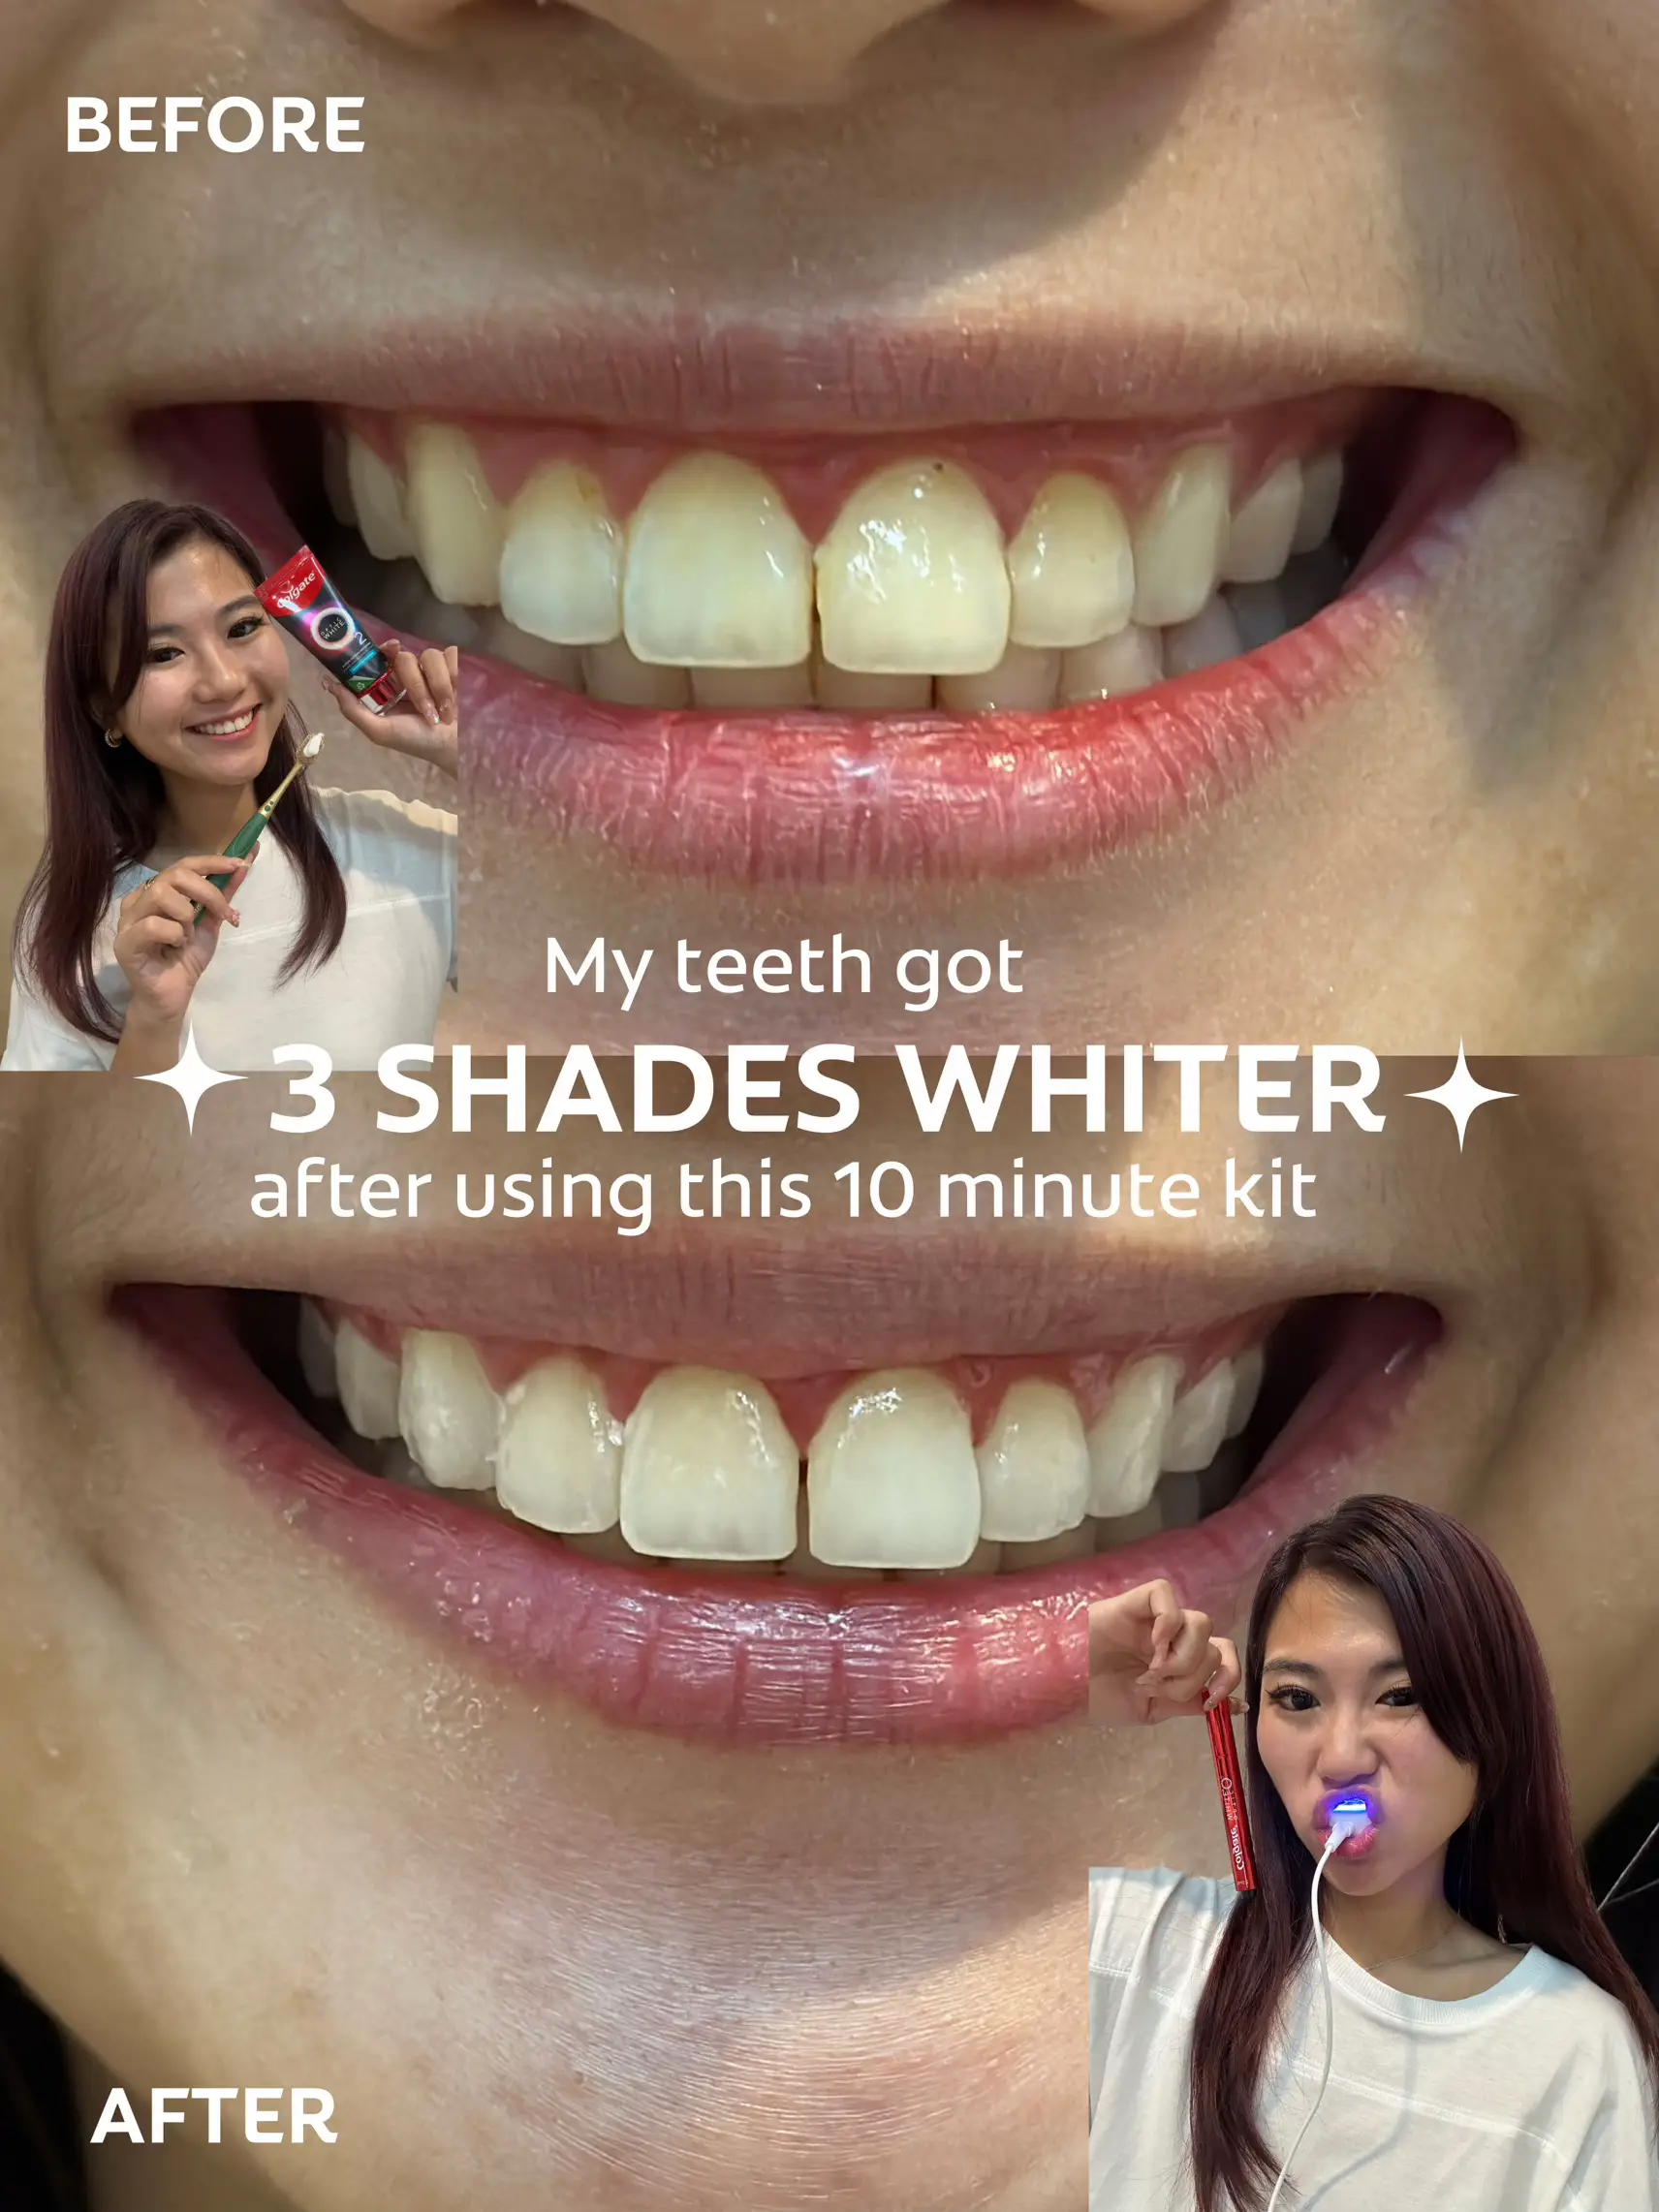 how to get White teeth - Lemon8 Search